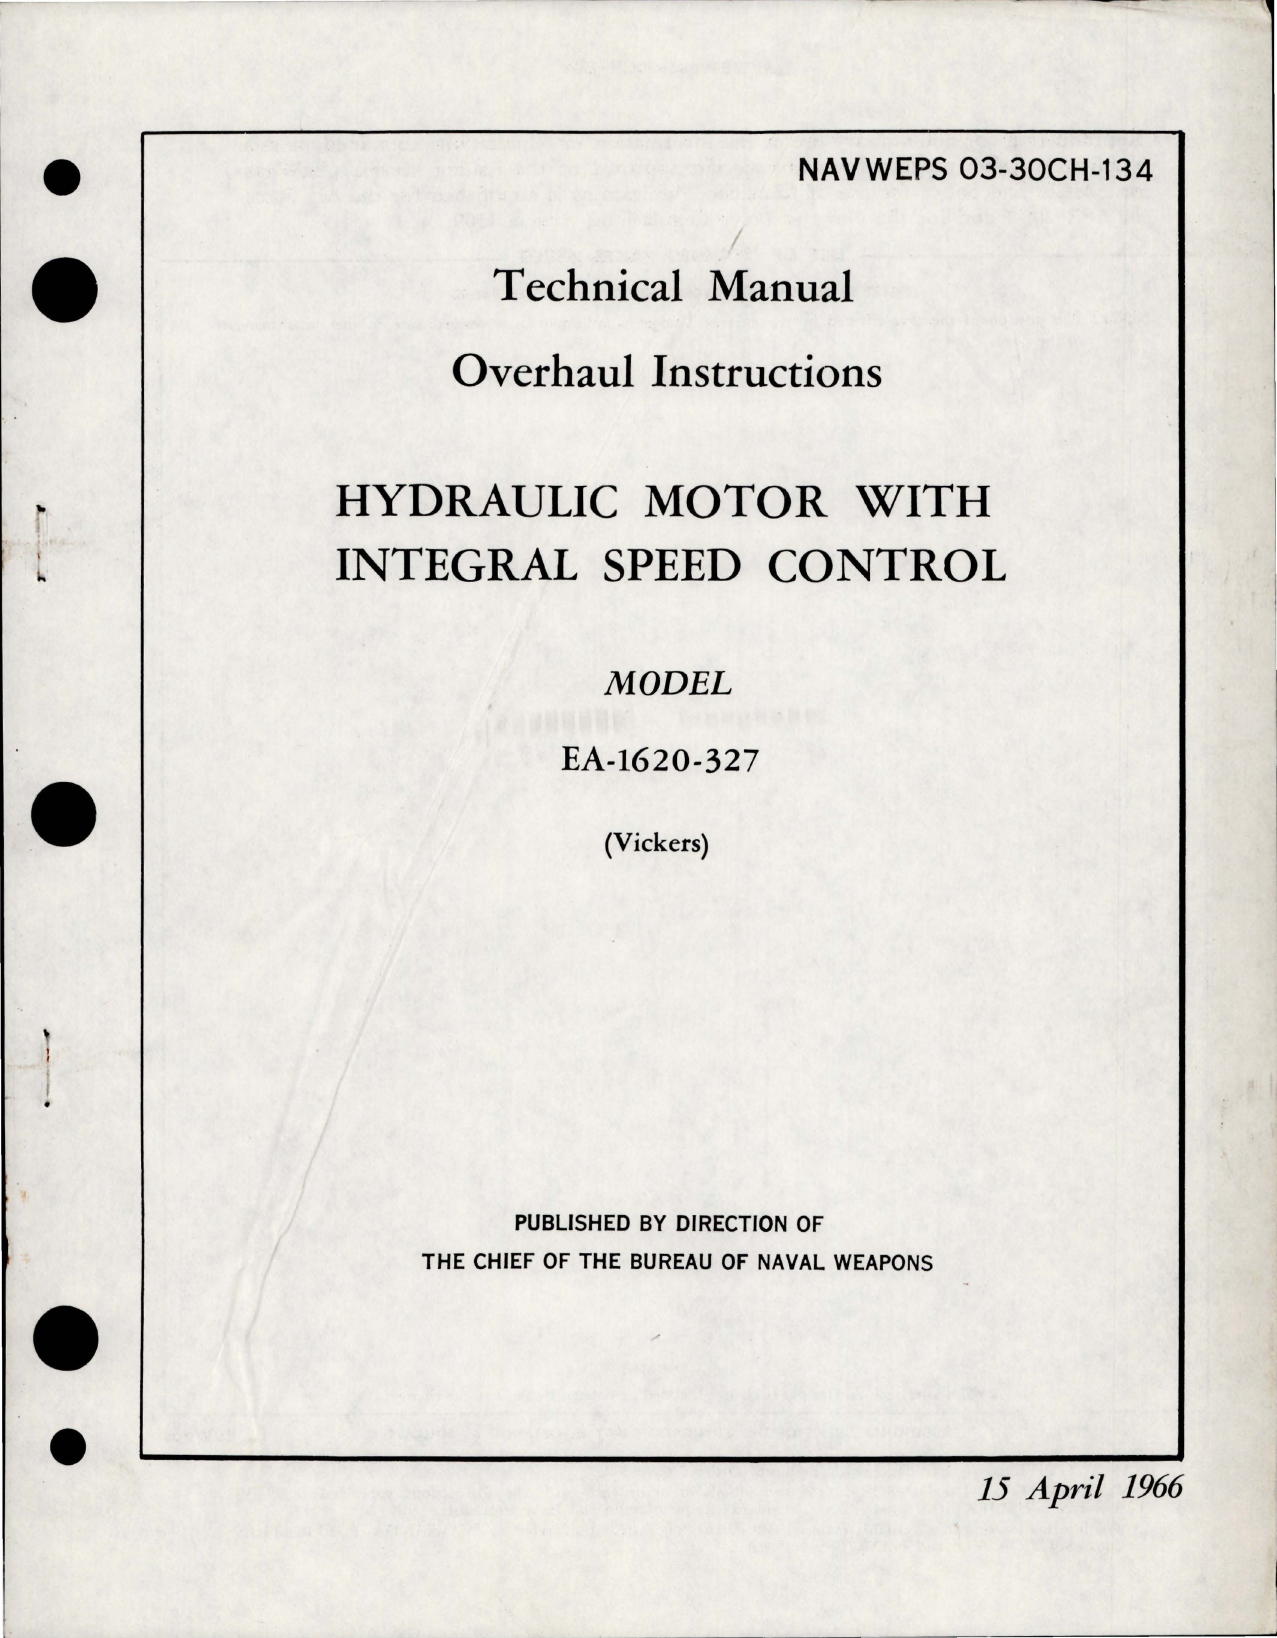 Sample page 1 from AirCorps Library document: Overhaul Instructions for Hydraulic Motor with Integral Speed Control - Model EA-1620-327 